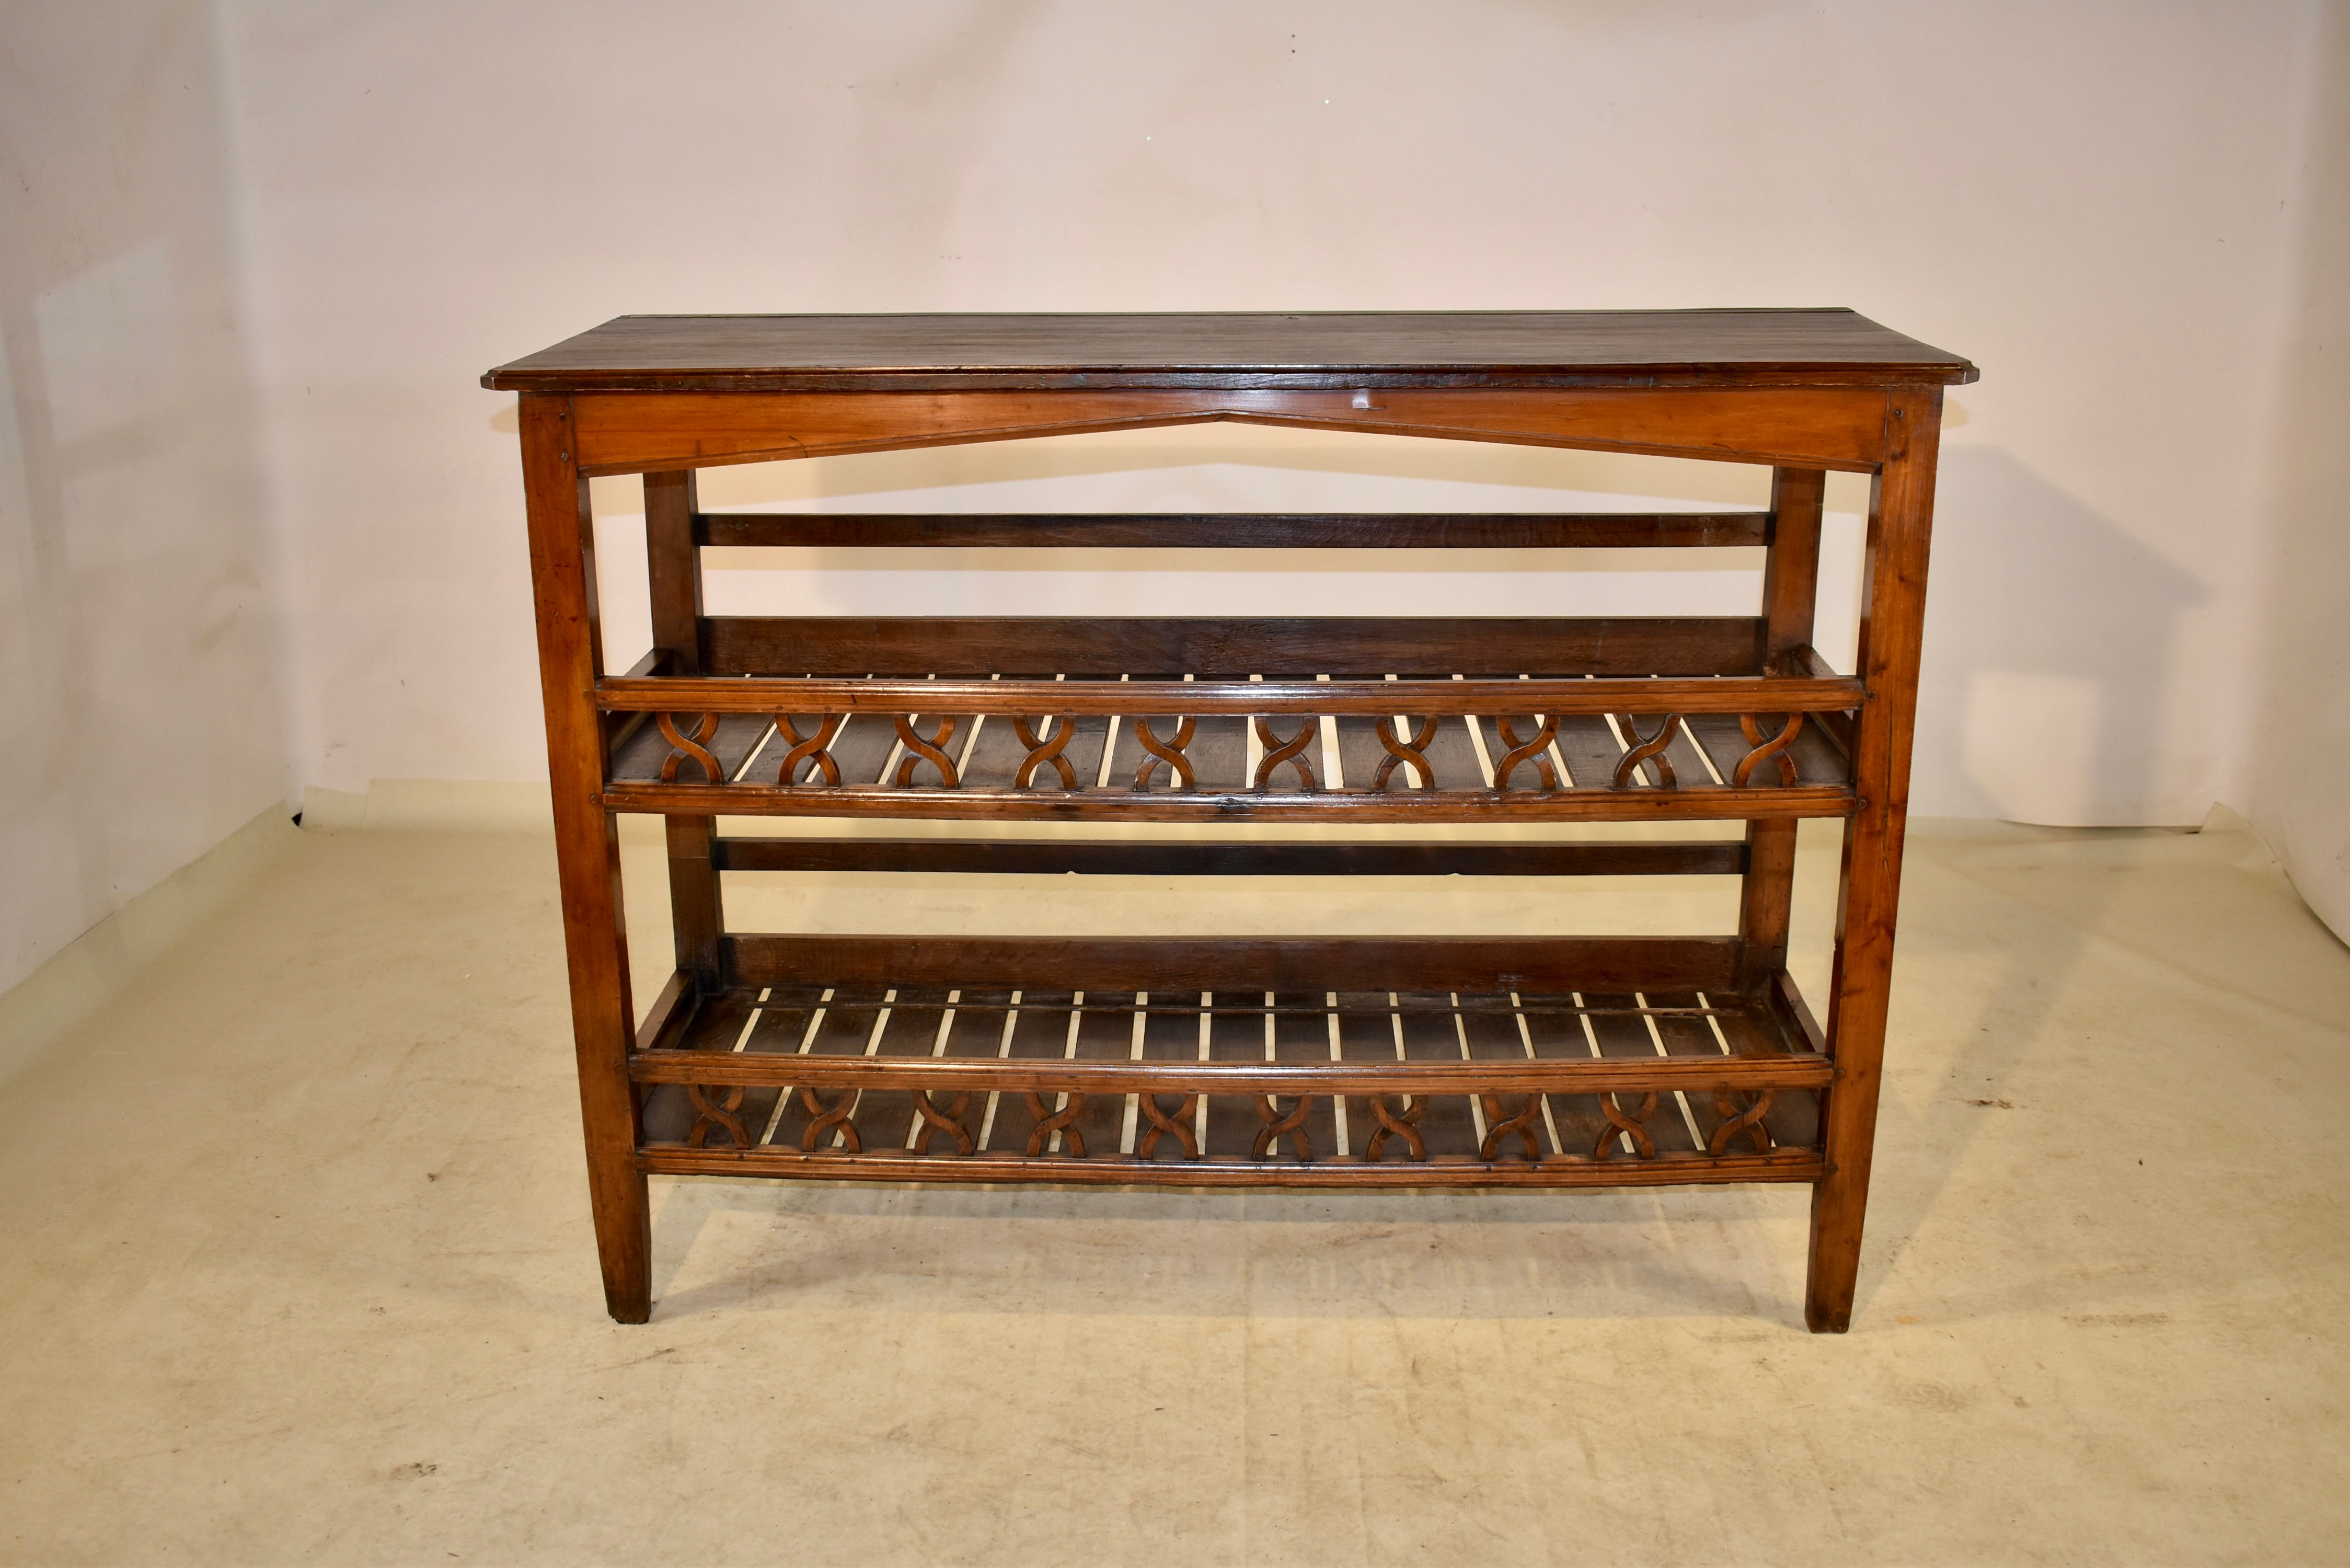 19th century oak baker's rack from France. This is a wonderful and rare piece with a beveled edge around the top following down to a simple arched apron.  There are two shelves with galleries around each side and lovely hand carved baluster-type